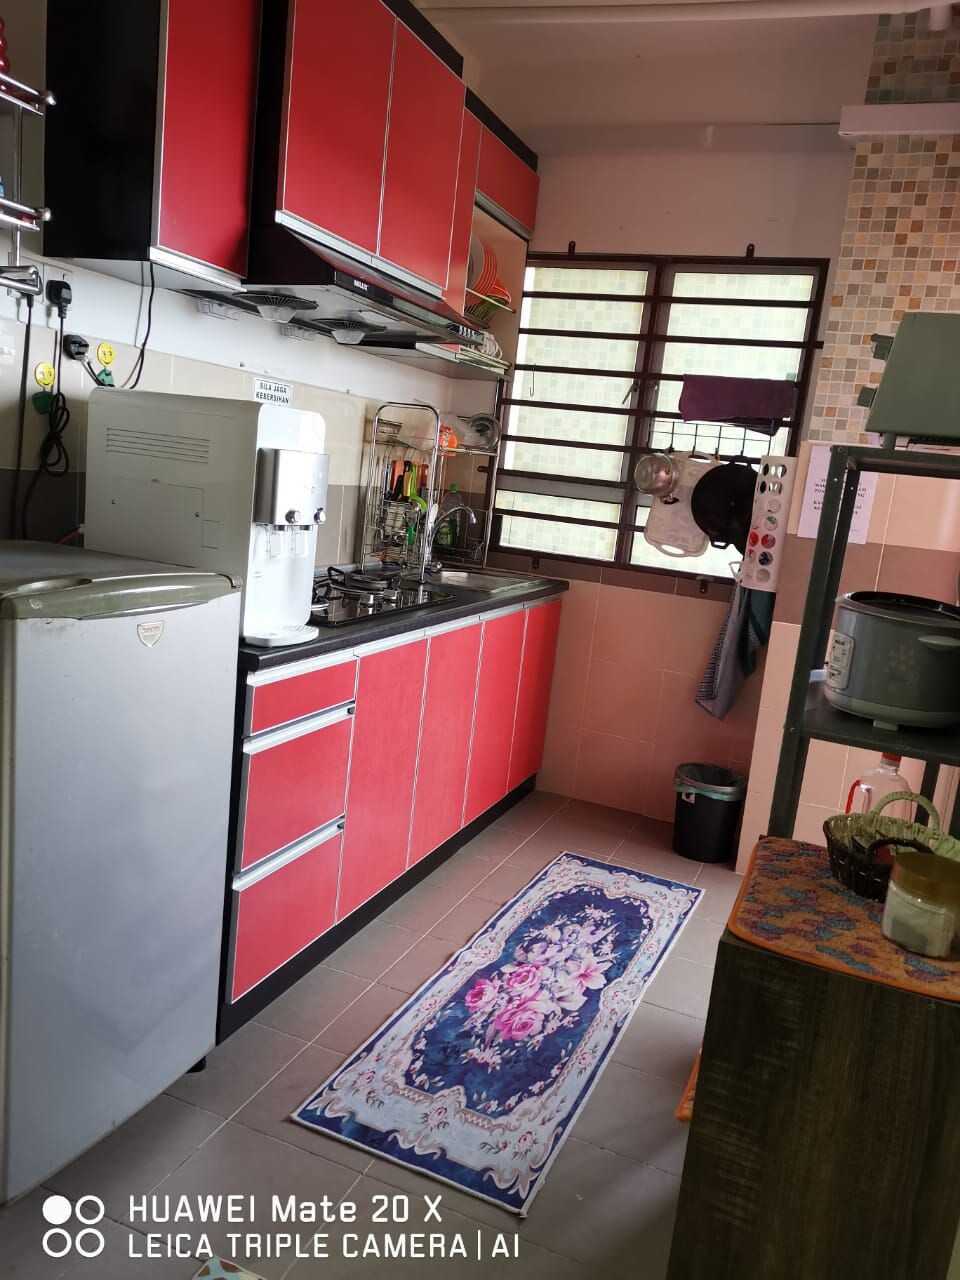 Double A homestay apartment ladang tokpelam